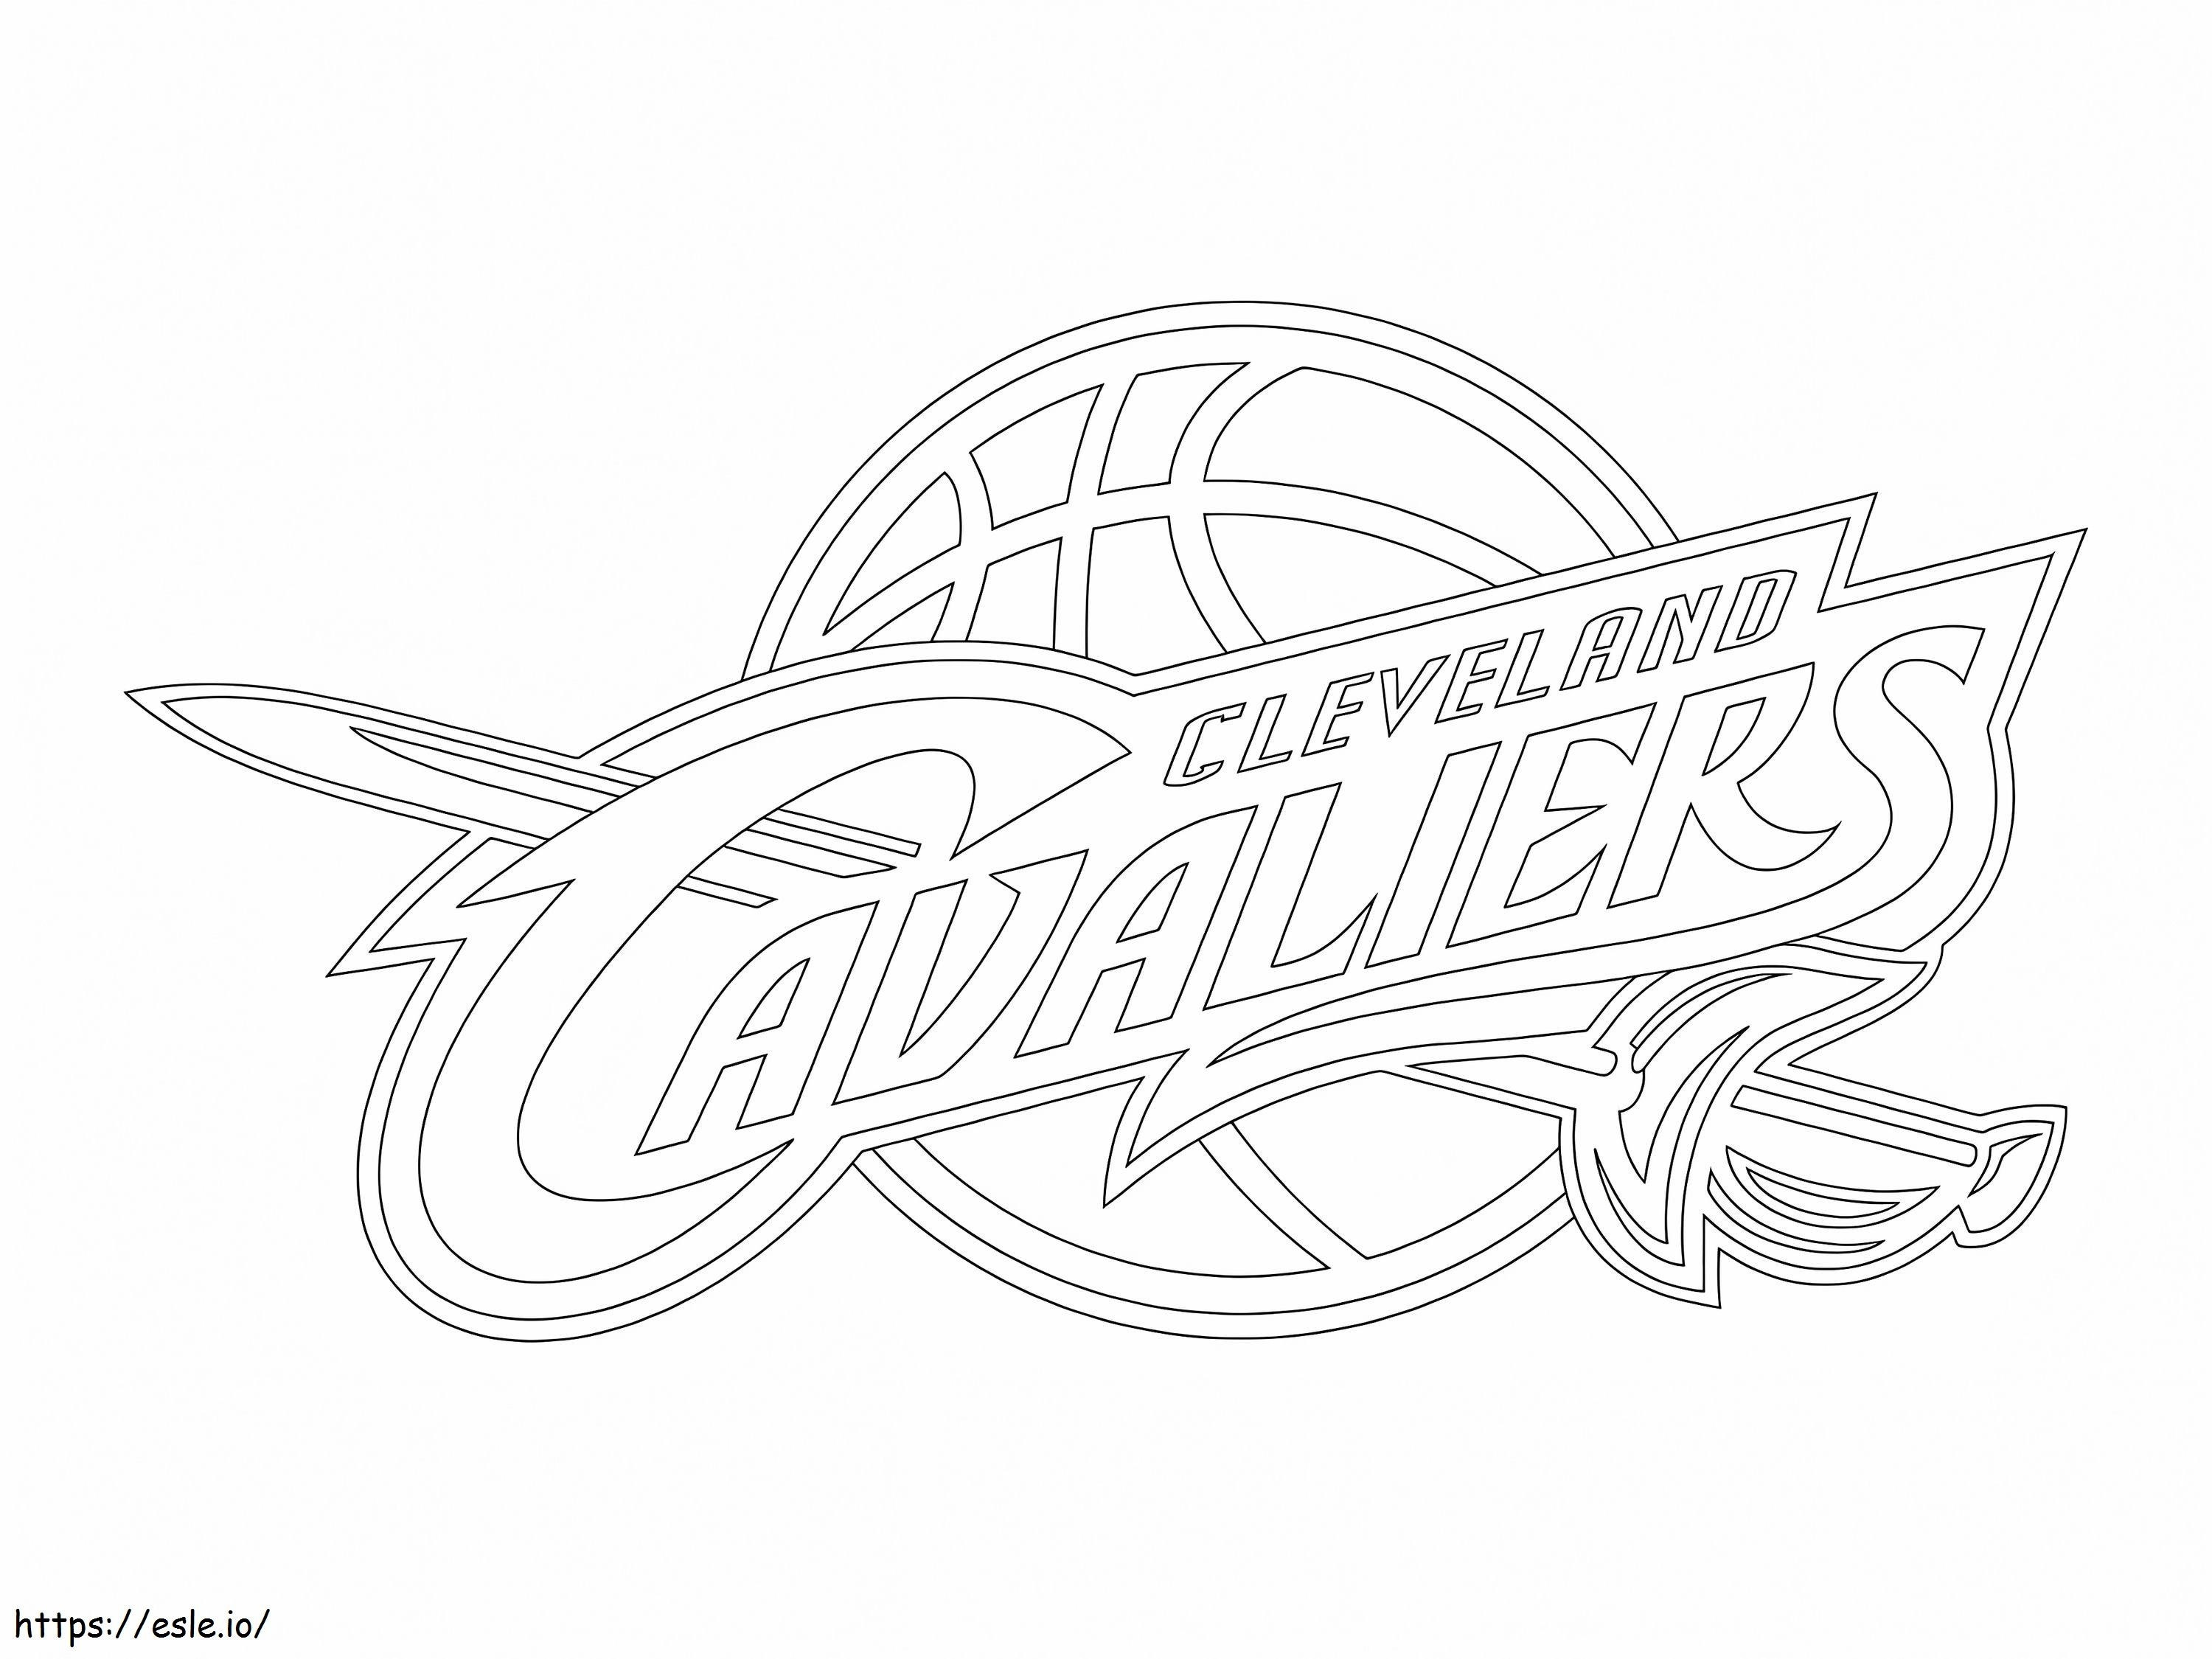 1579058454 Cleveland Cavaliers Logo E1600734680257 coloring page